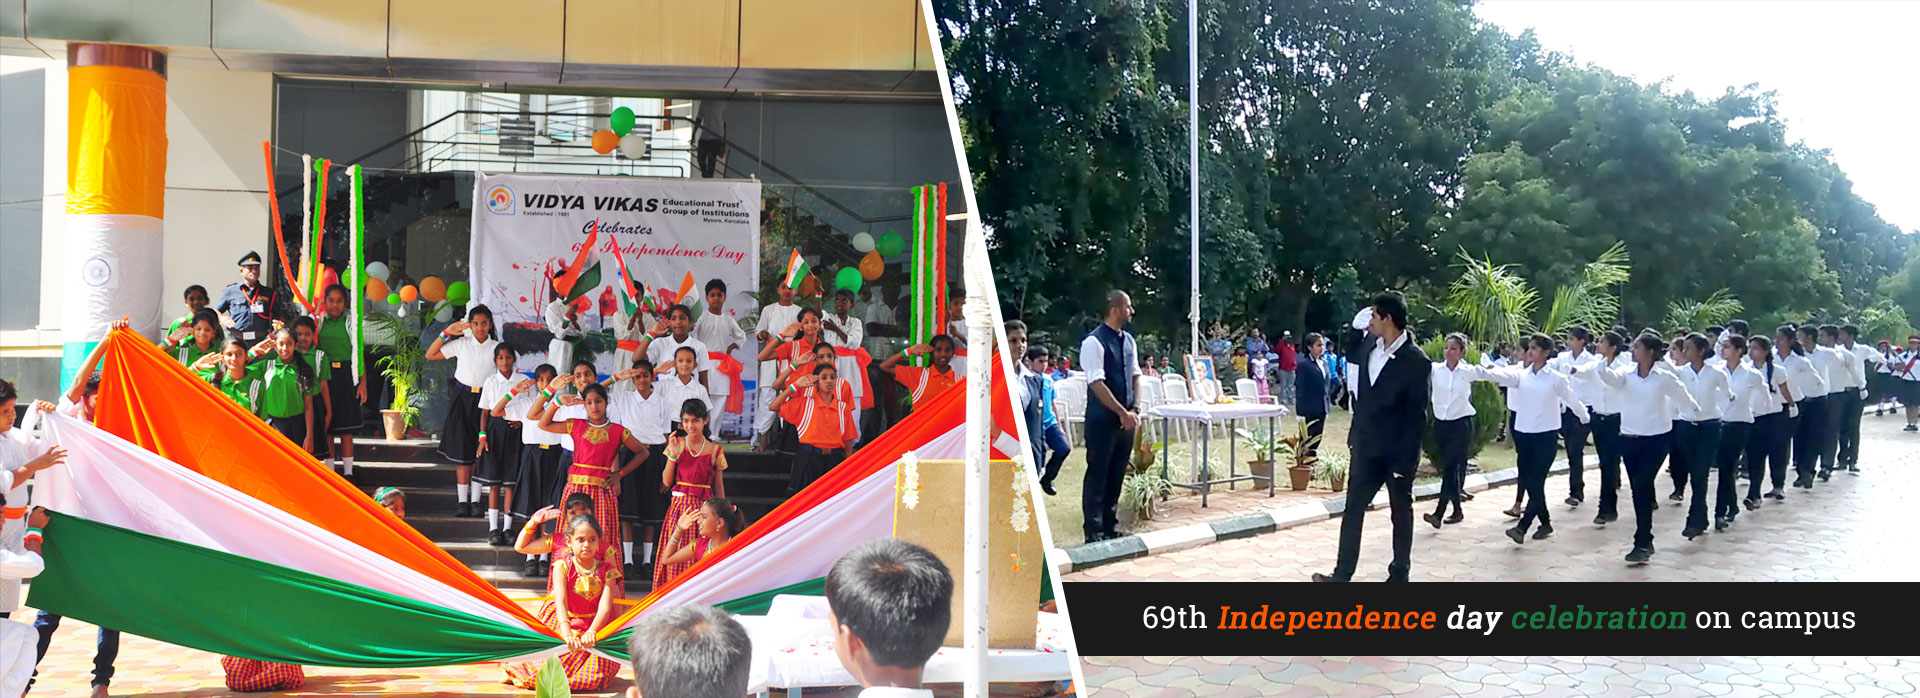 69th Independence day celebrations on campus